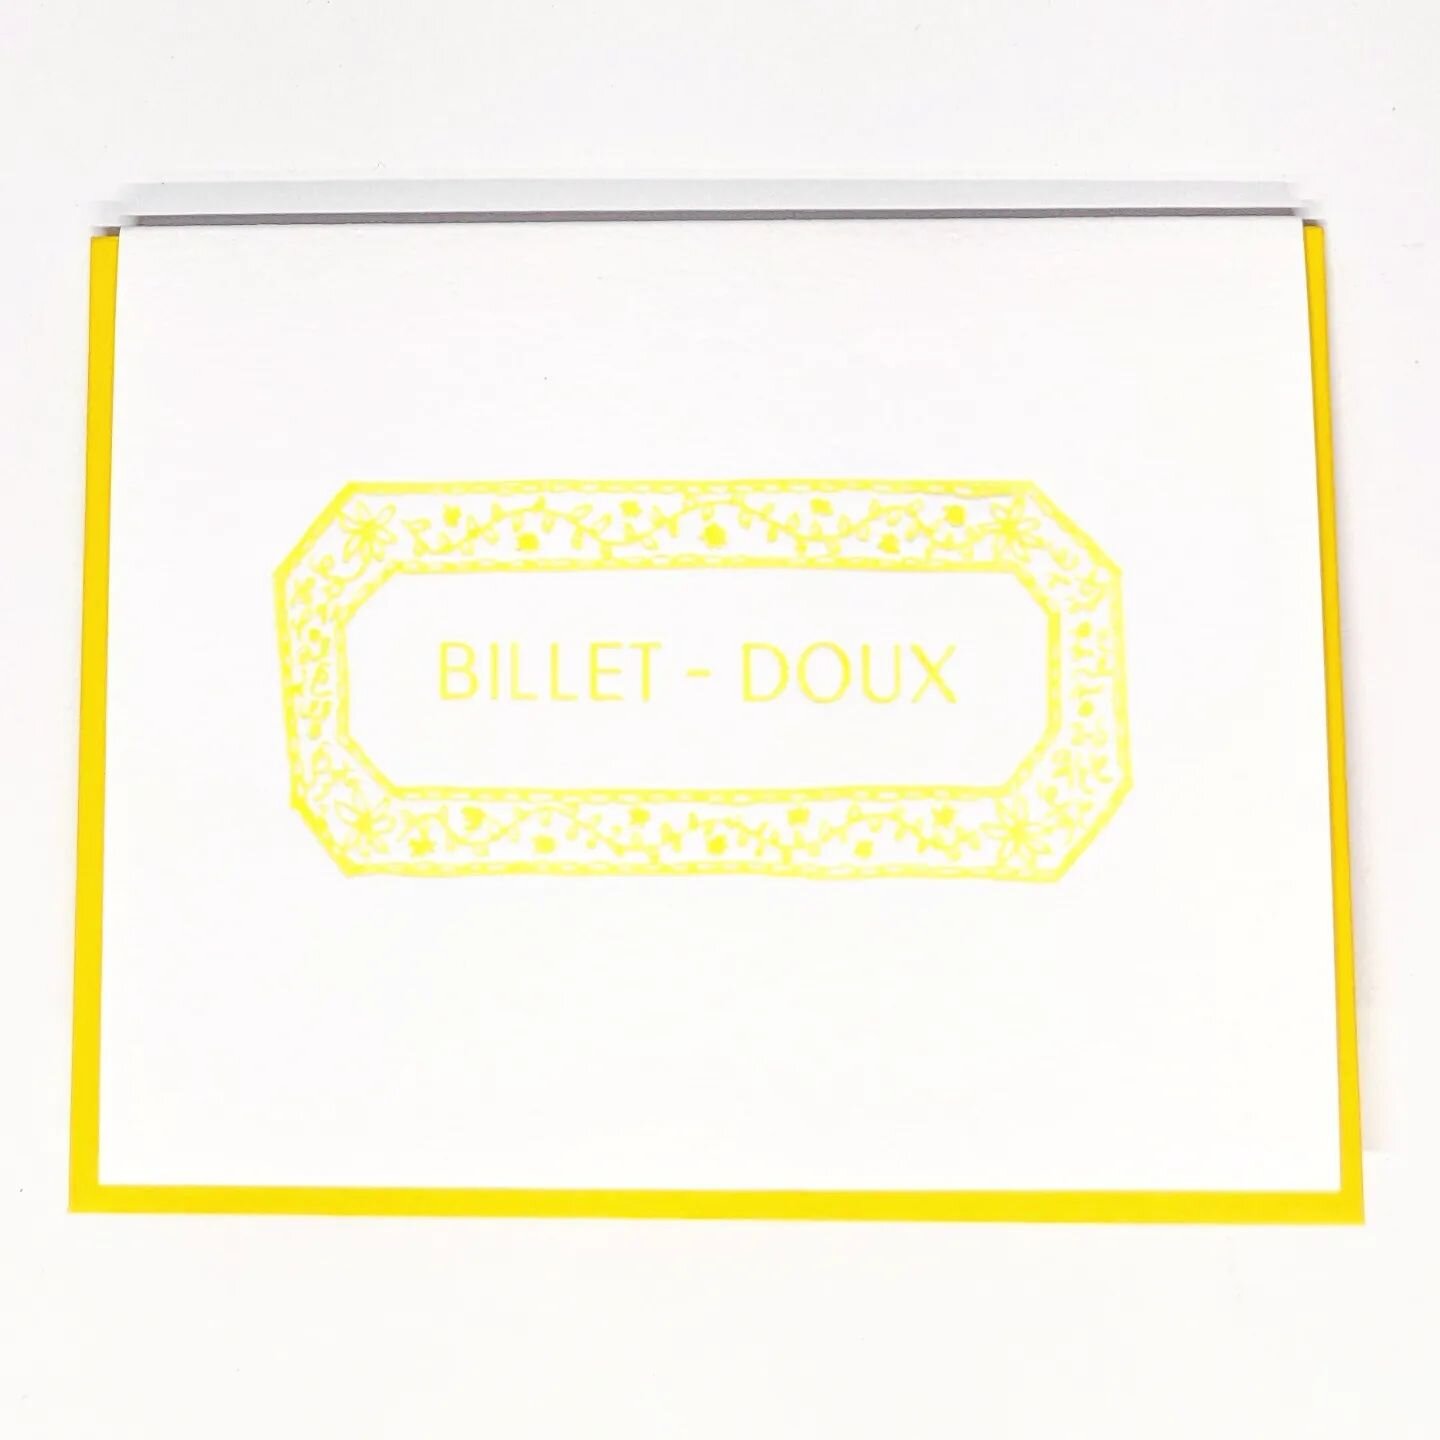 NEW CARD: Billet- Doux
Here's the 4th card in my vintage mail slot series no one was asked for, in a language I don't speak. Billet-doux means love note in French and I was smitten when it appeared in my word of the day email several months ago. I ha